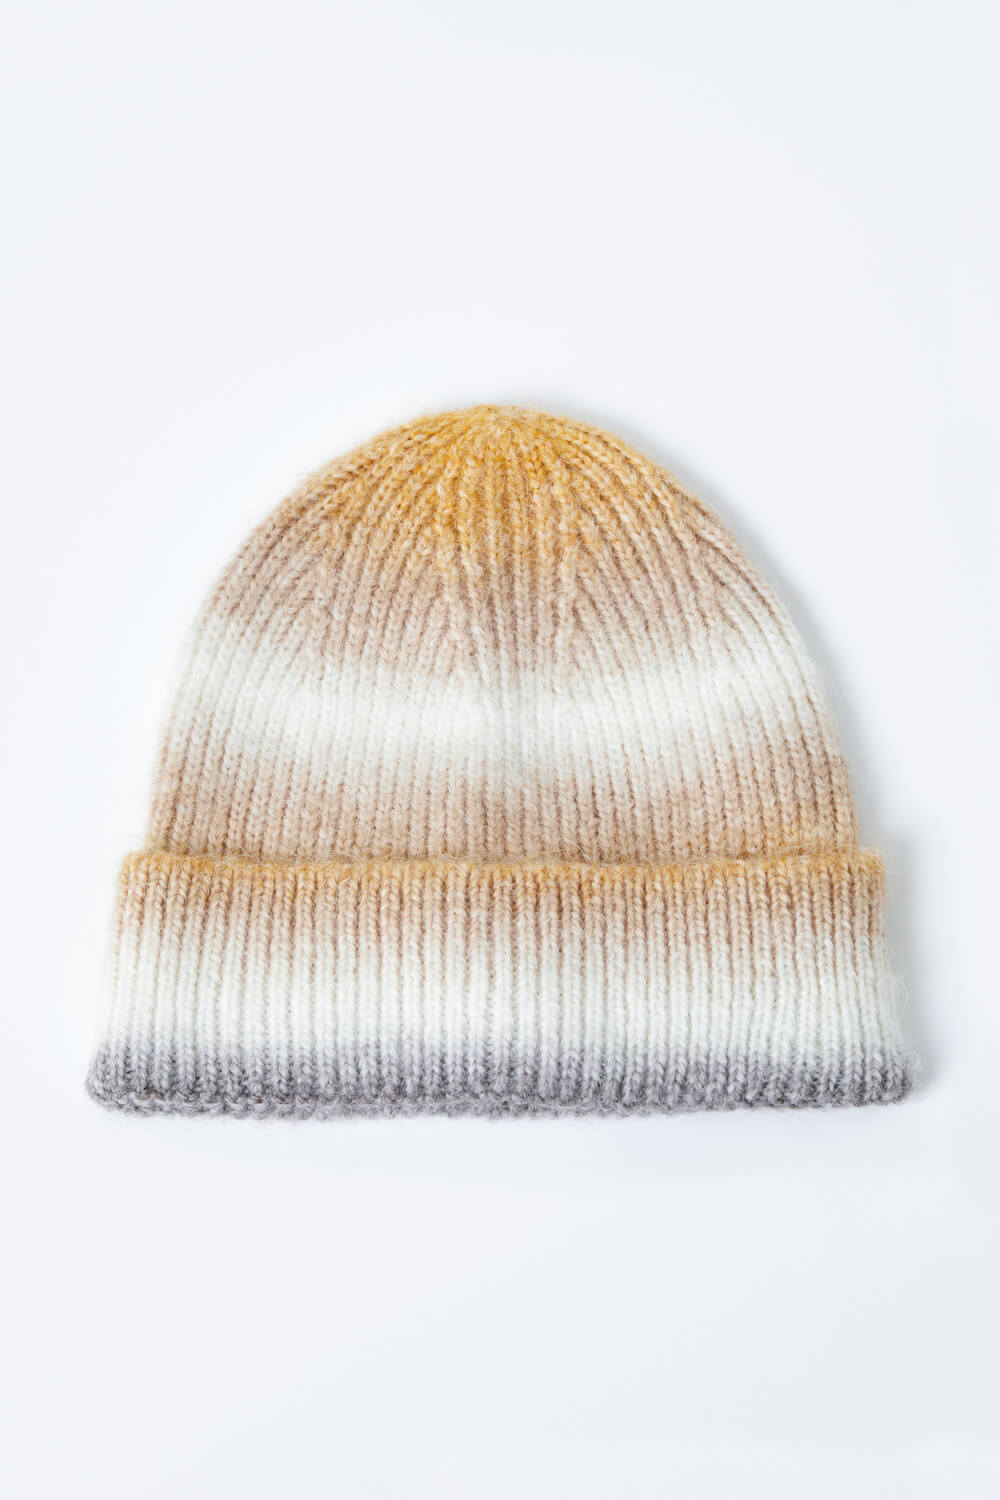 Yellow Ombre Stretch Knit Hat, Image 5 of 5